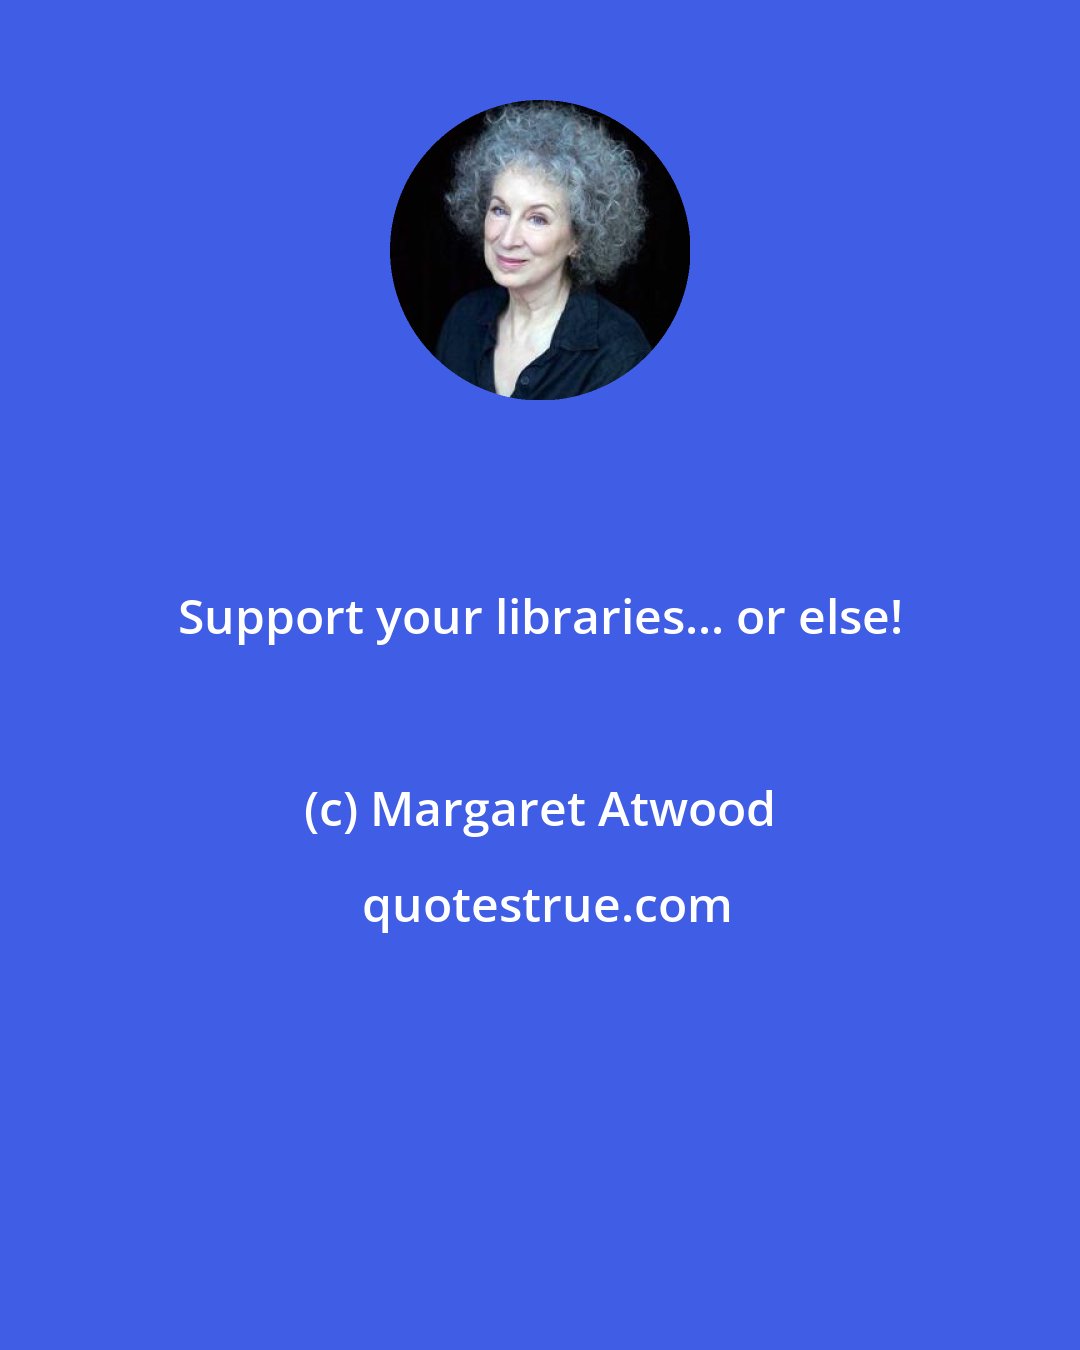 Margaret Atwood: Support your libraries... or else!